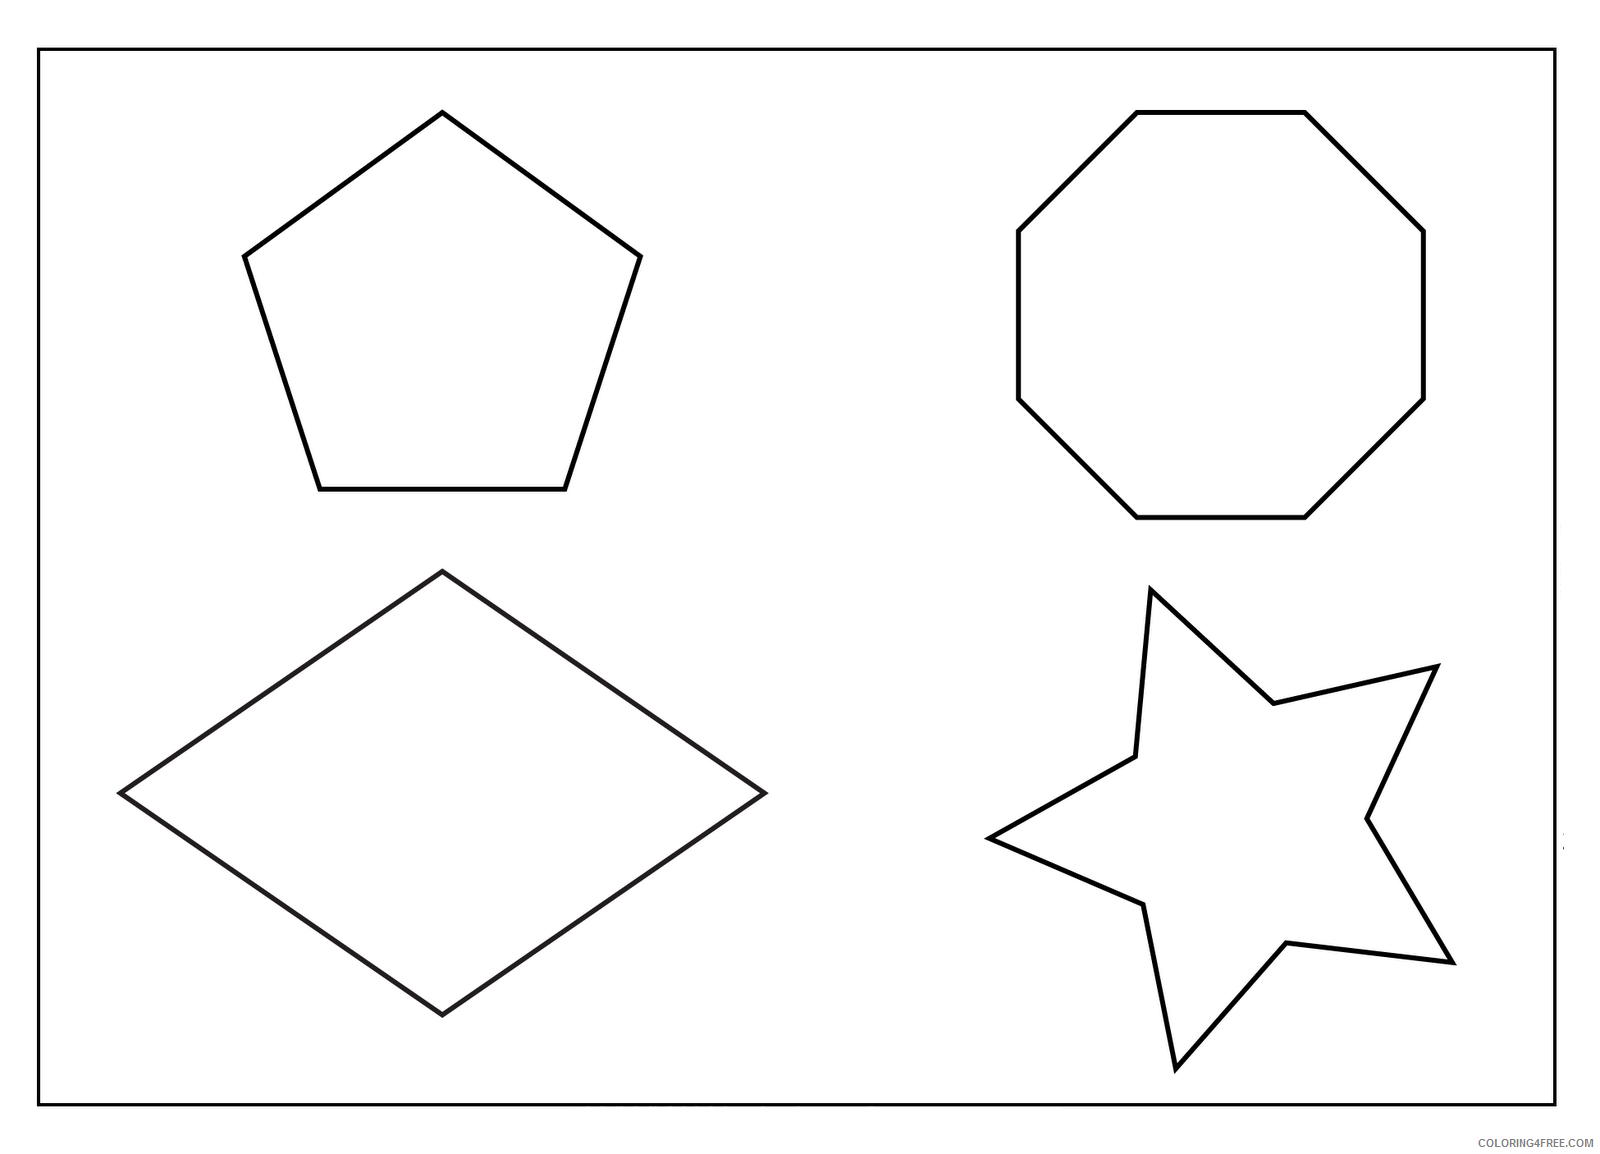 Shapes Coloring Pages Educational Geometric Shapes Printable 2020 1867 Coloring4free